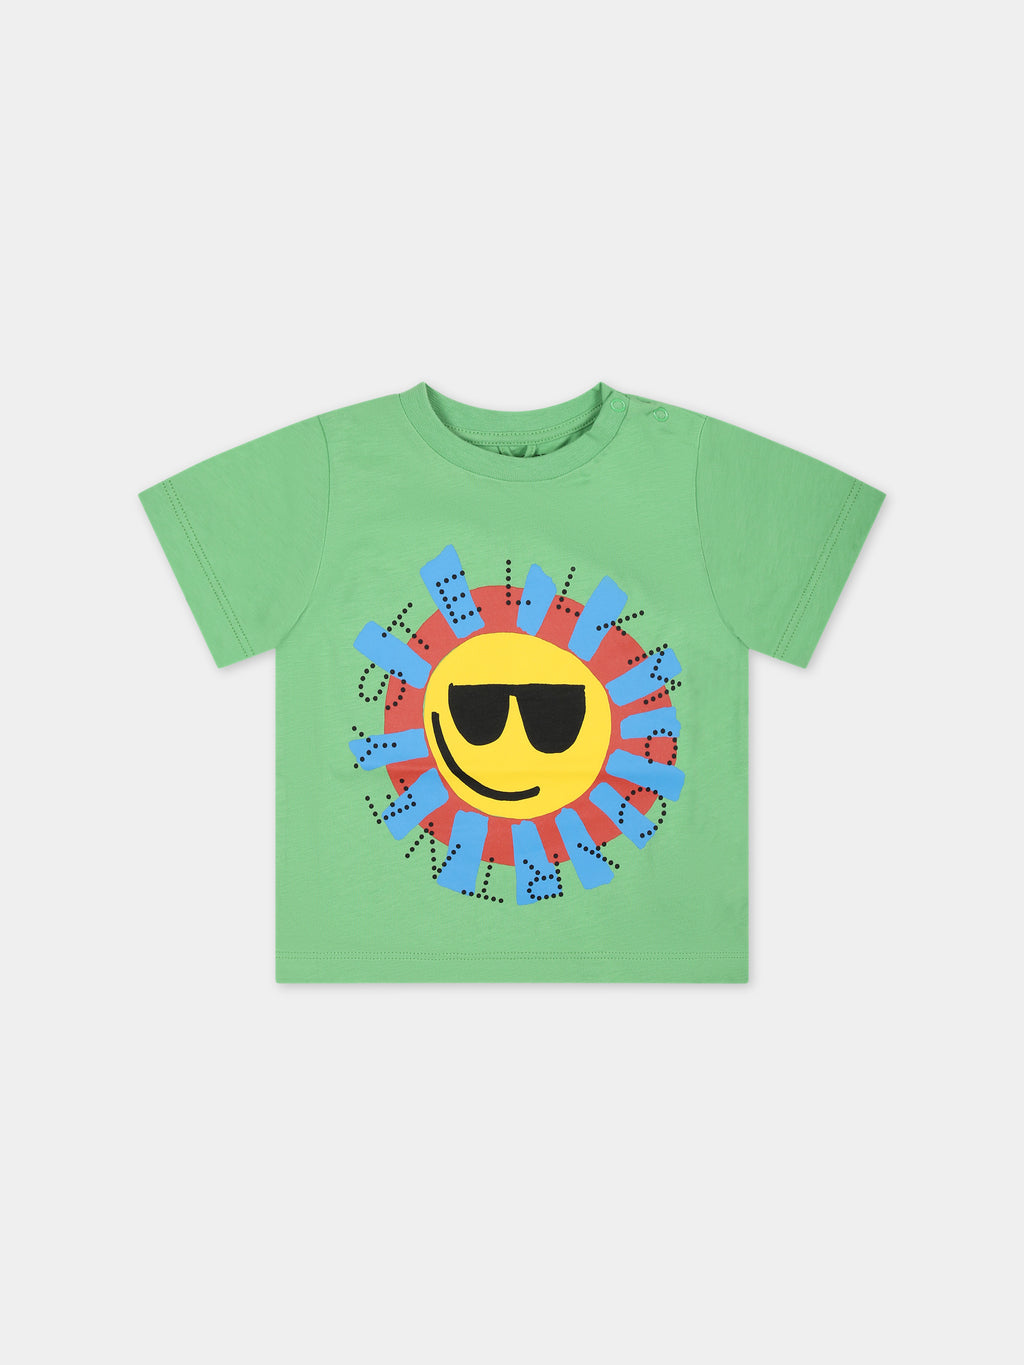 Green t-shirt for baby boy with sun